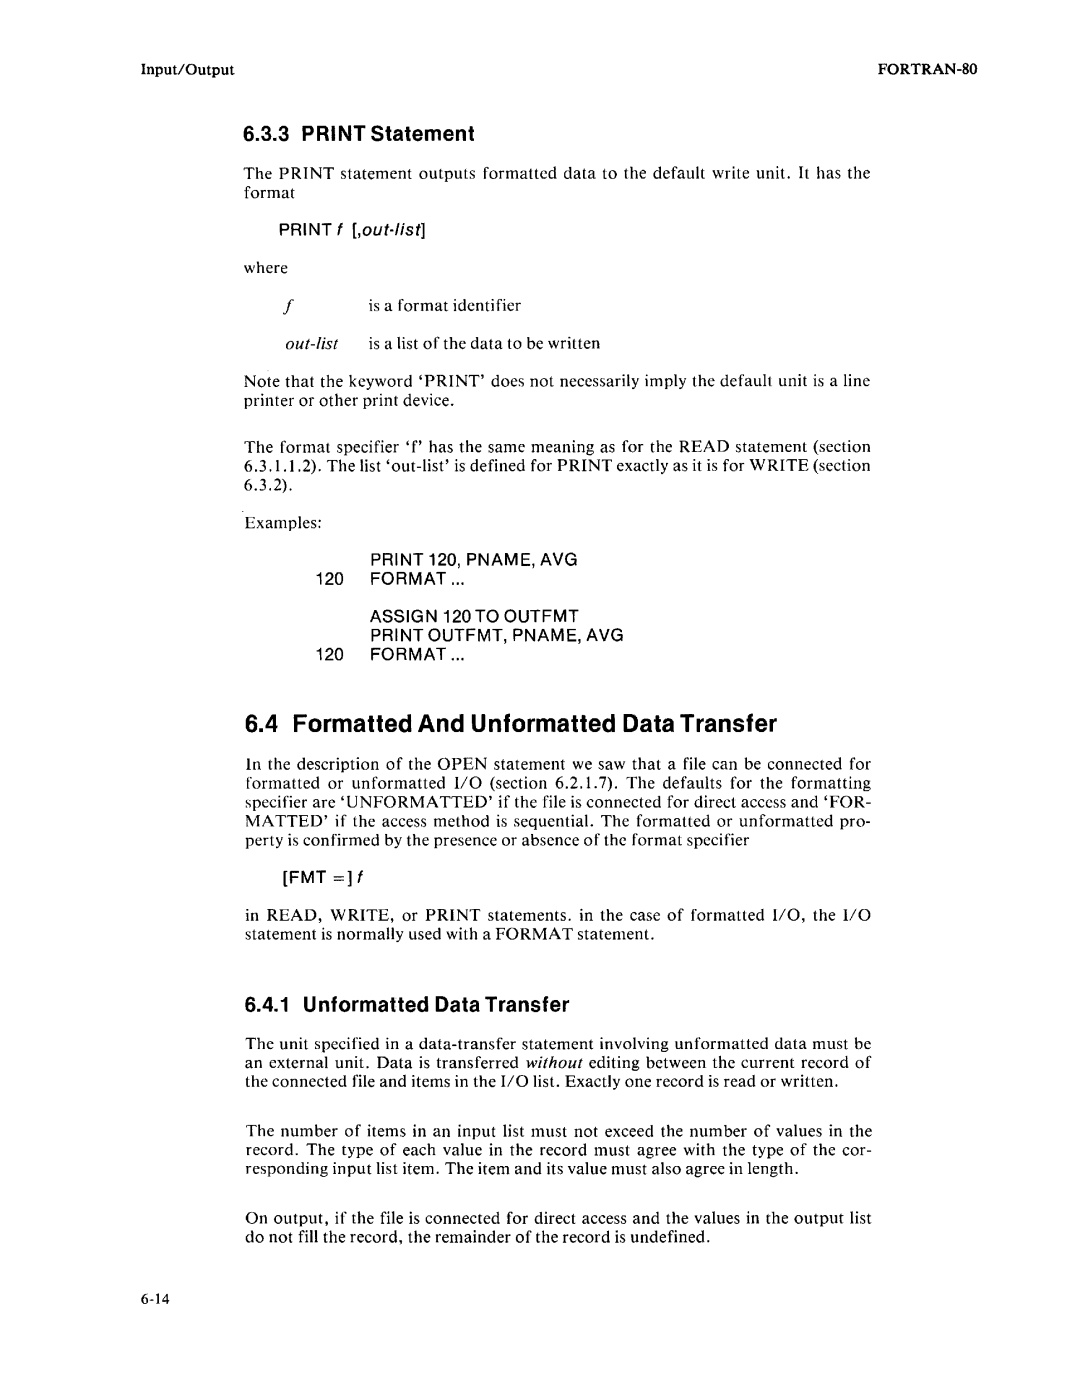 Intel fortran-80 manual 6.4Formatted And Unformatted Data Transfer, PRINT Statement 